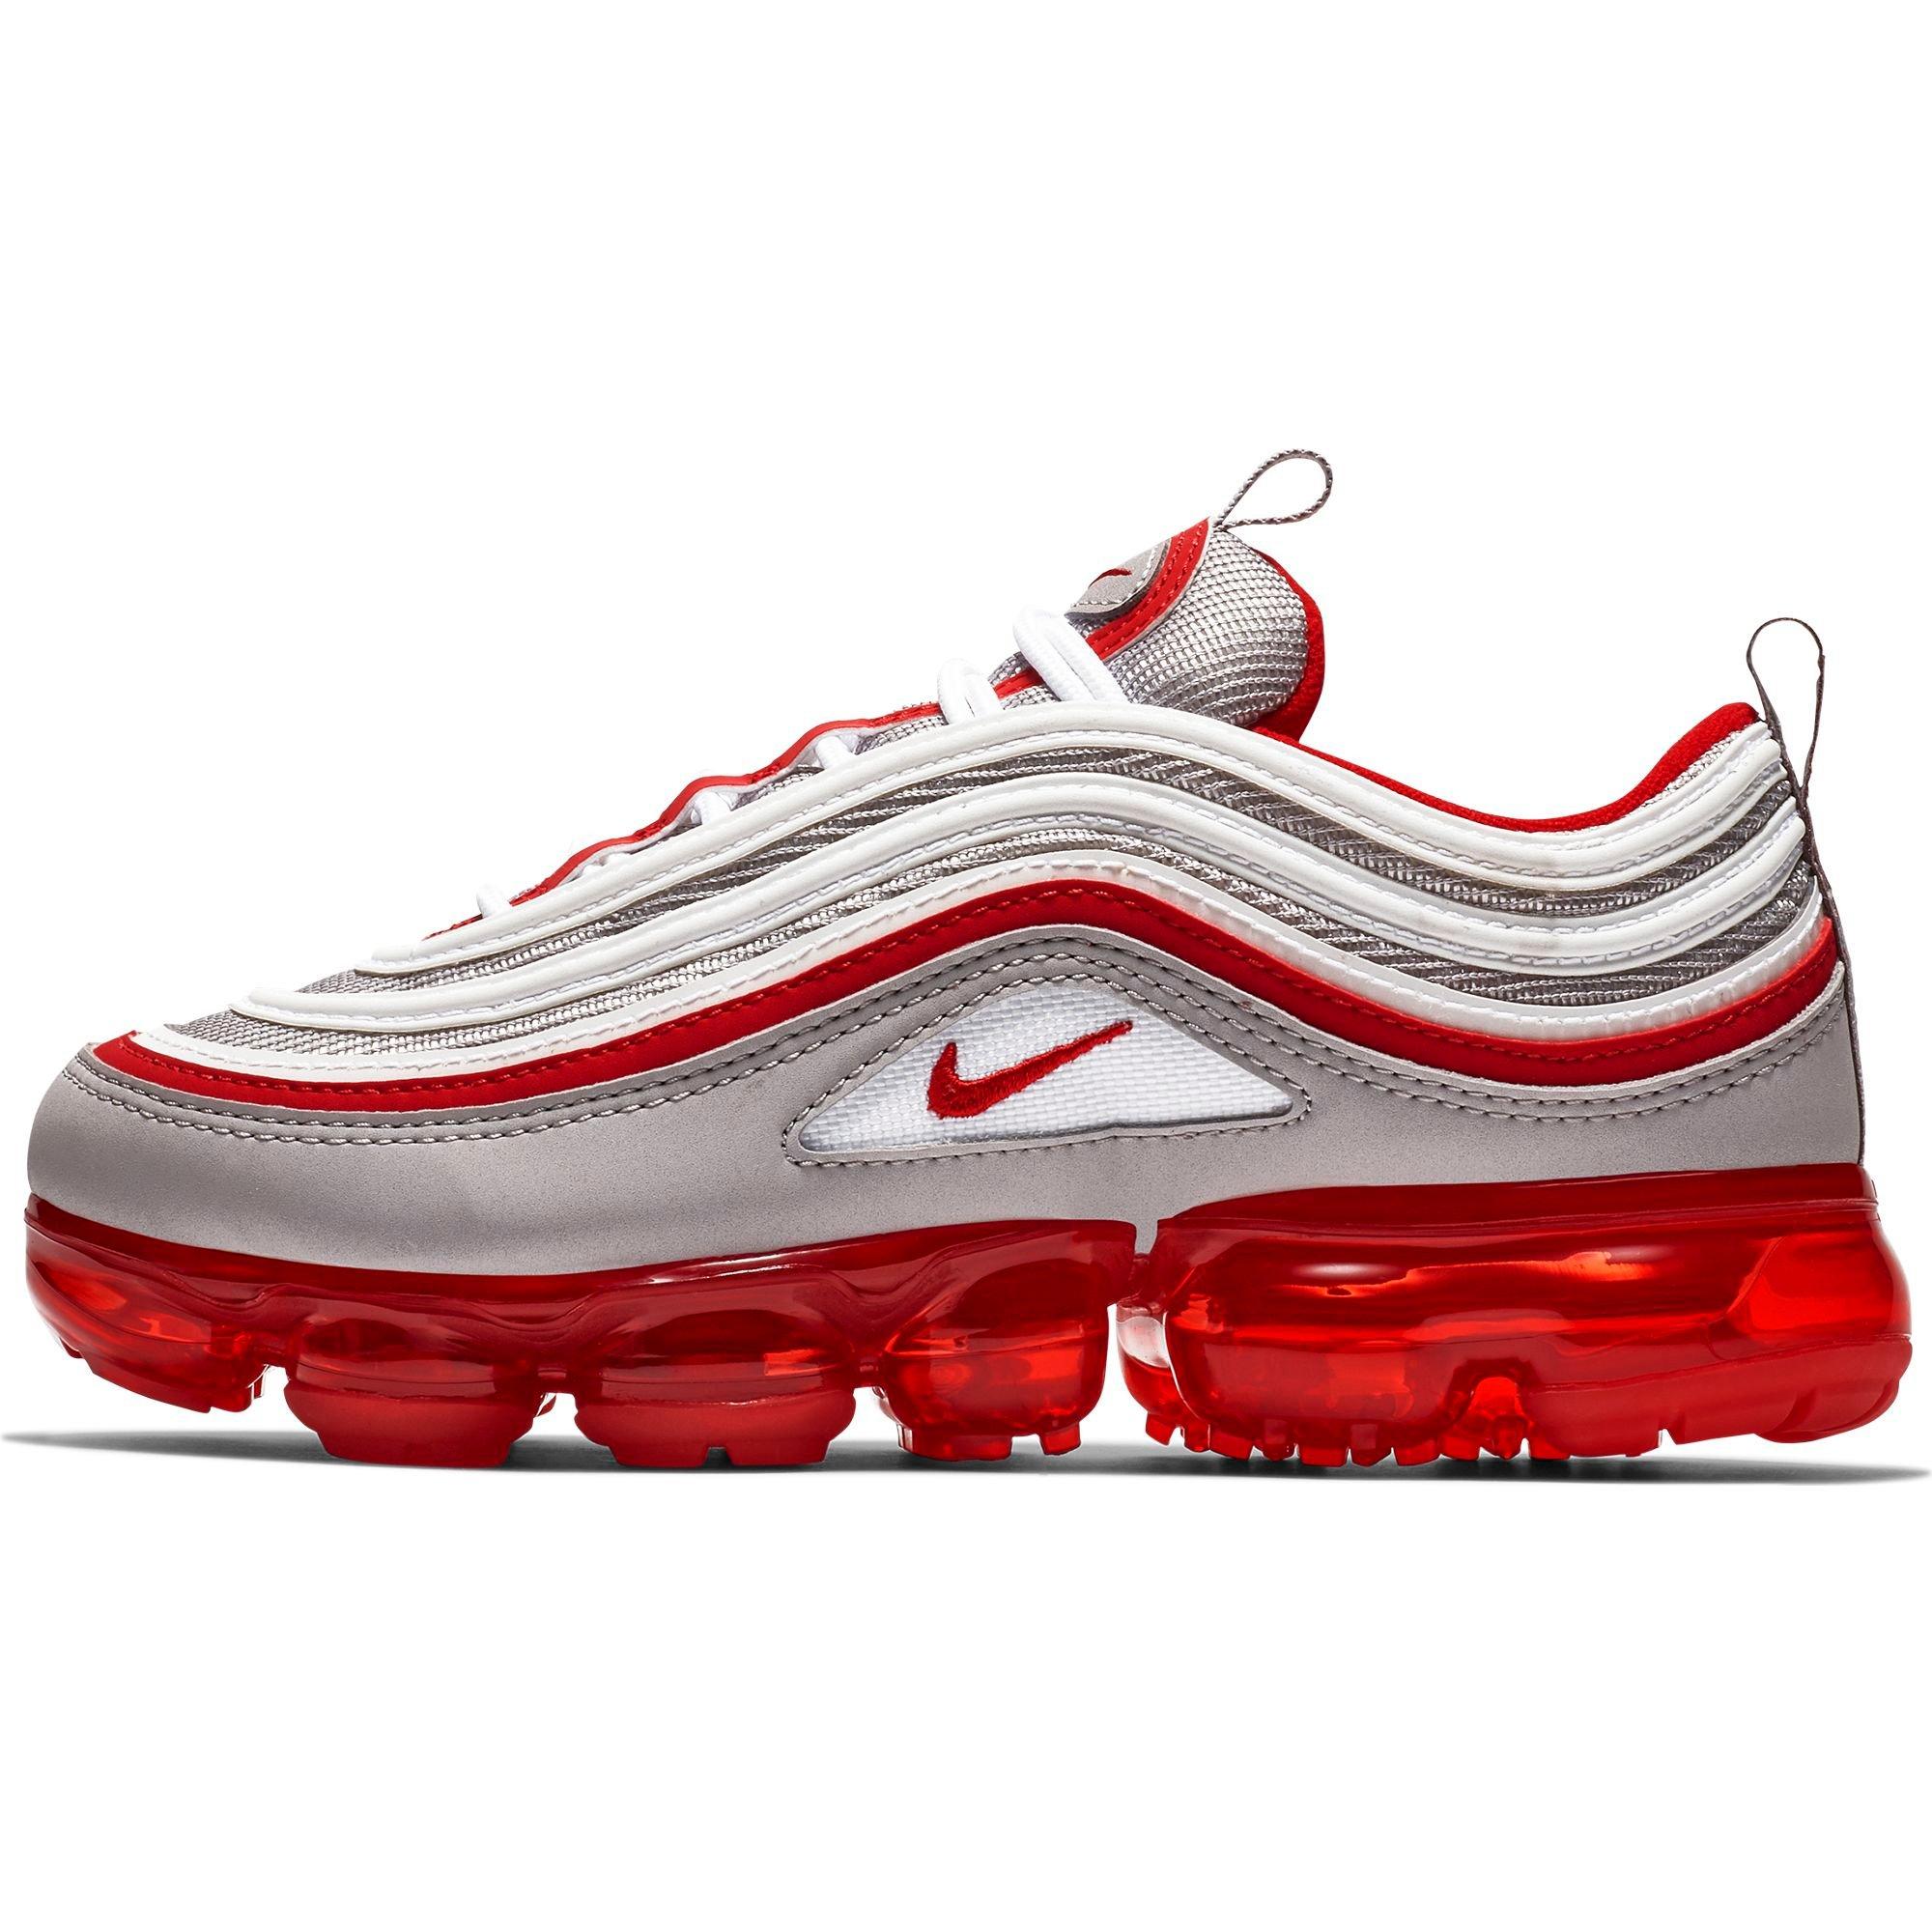 red and white air max 97 vapormax